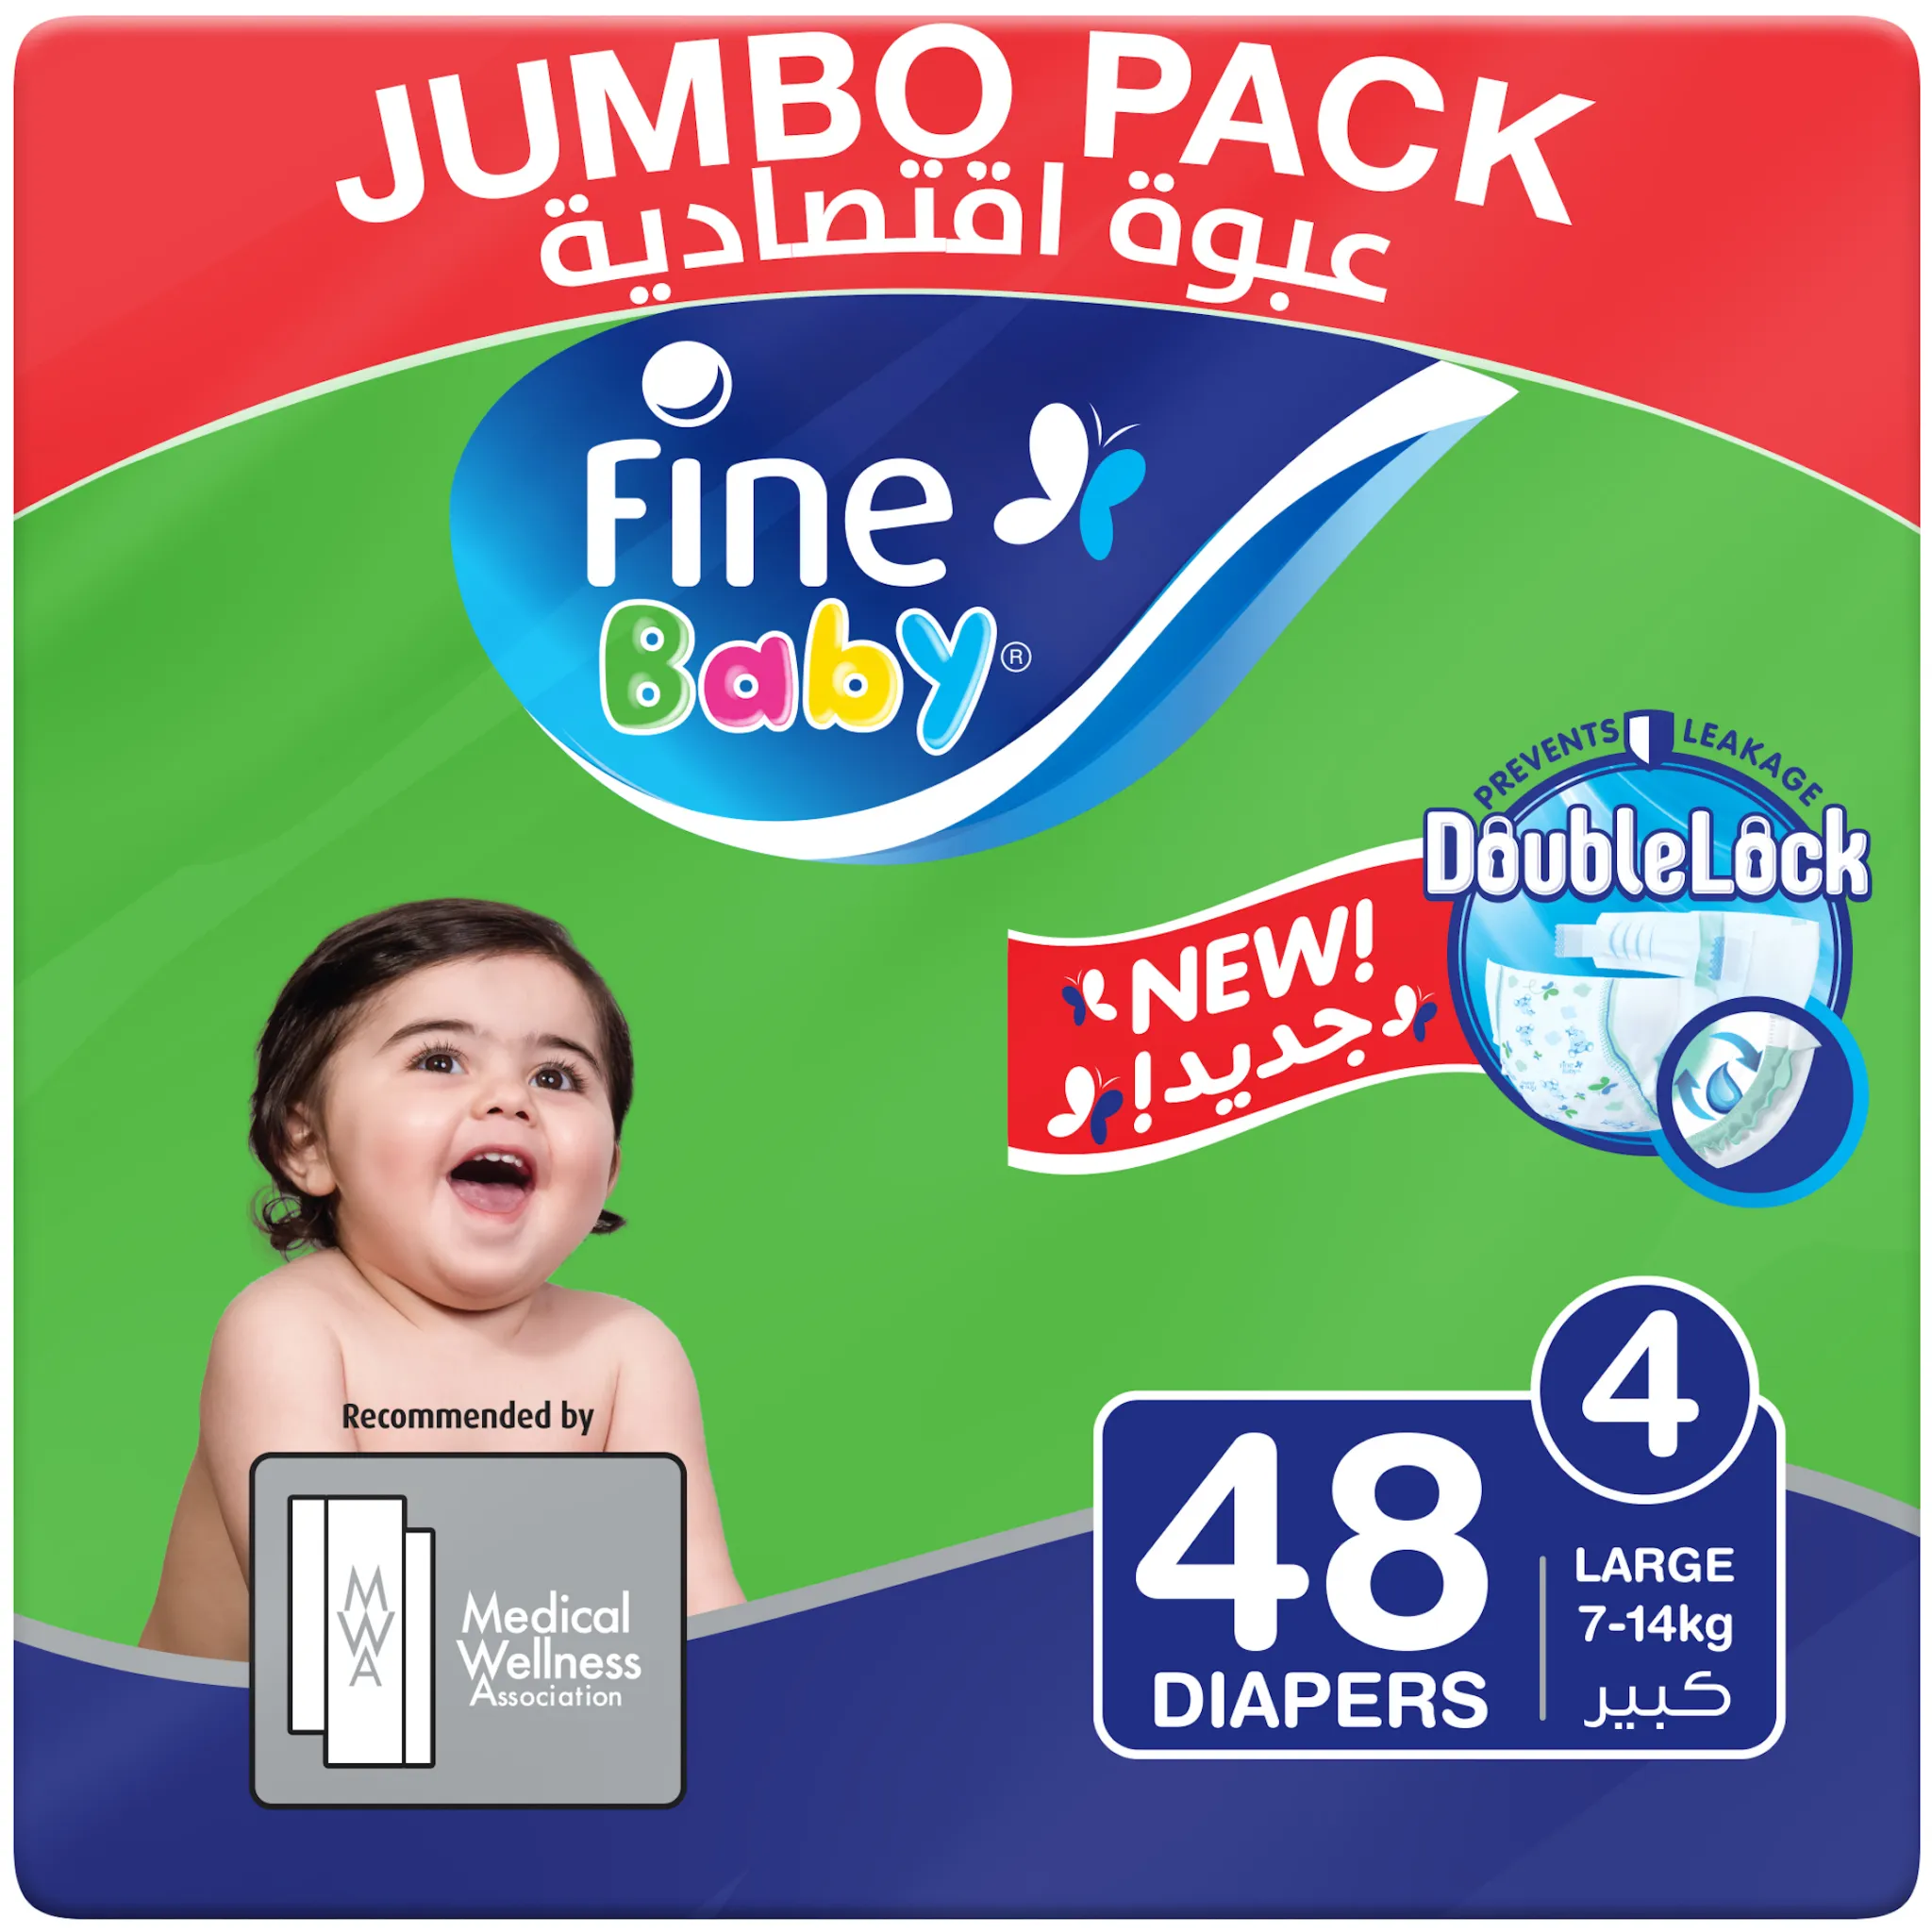 Fine Baby Diapers, Size 4, Large 7 14kg, Jumbo Pack of 48 diapers